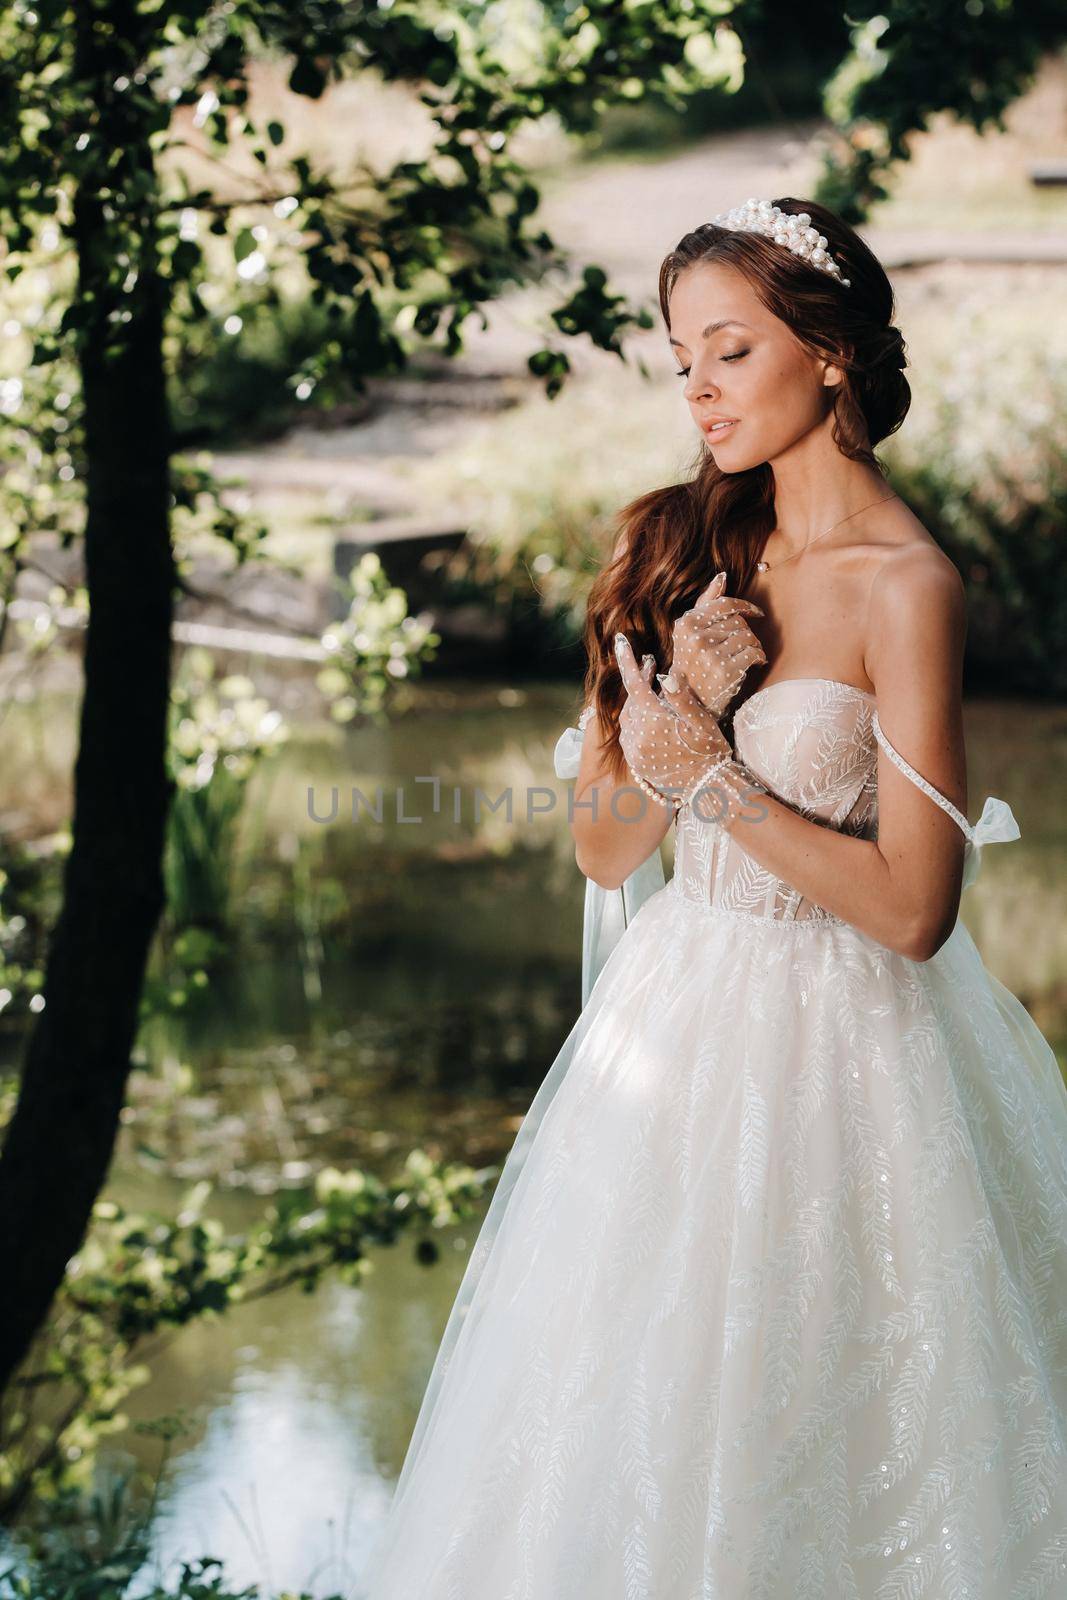 An elegant bride in a white dress, gloves with a bouquet on a waterfall in the Park, enjoying nature.Model in a wedding dress and gloves in the forest.Belarus.